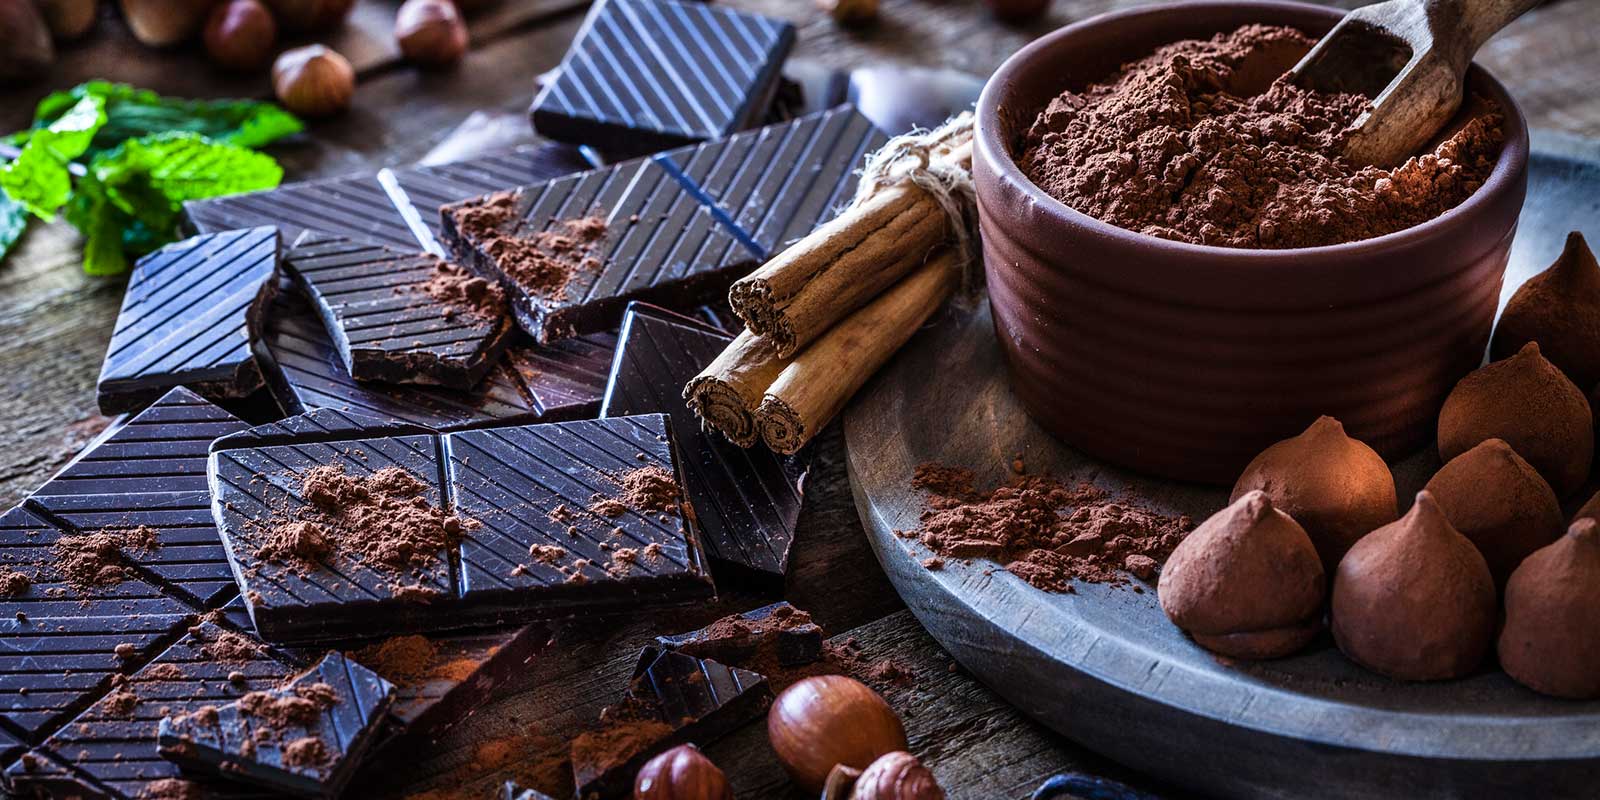 Chocolate is a help against coughing. Doctor's word